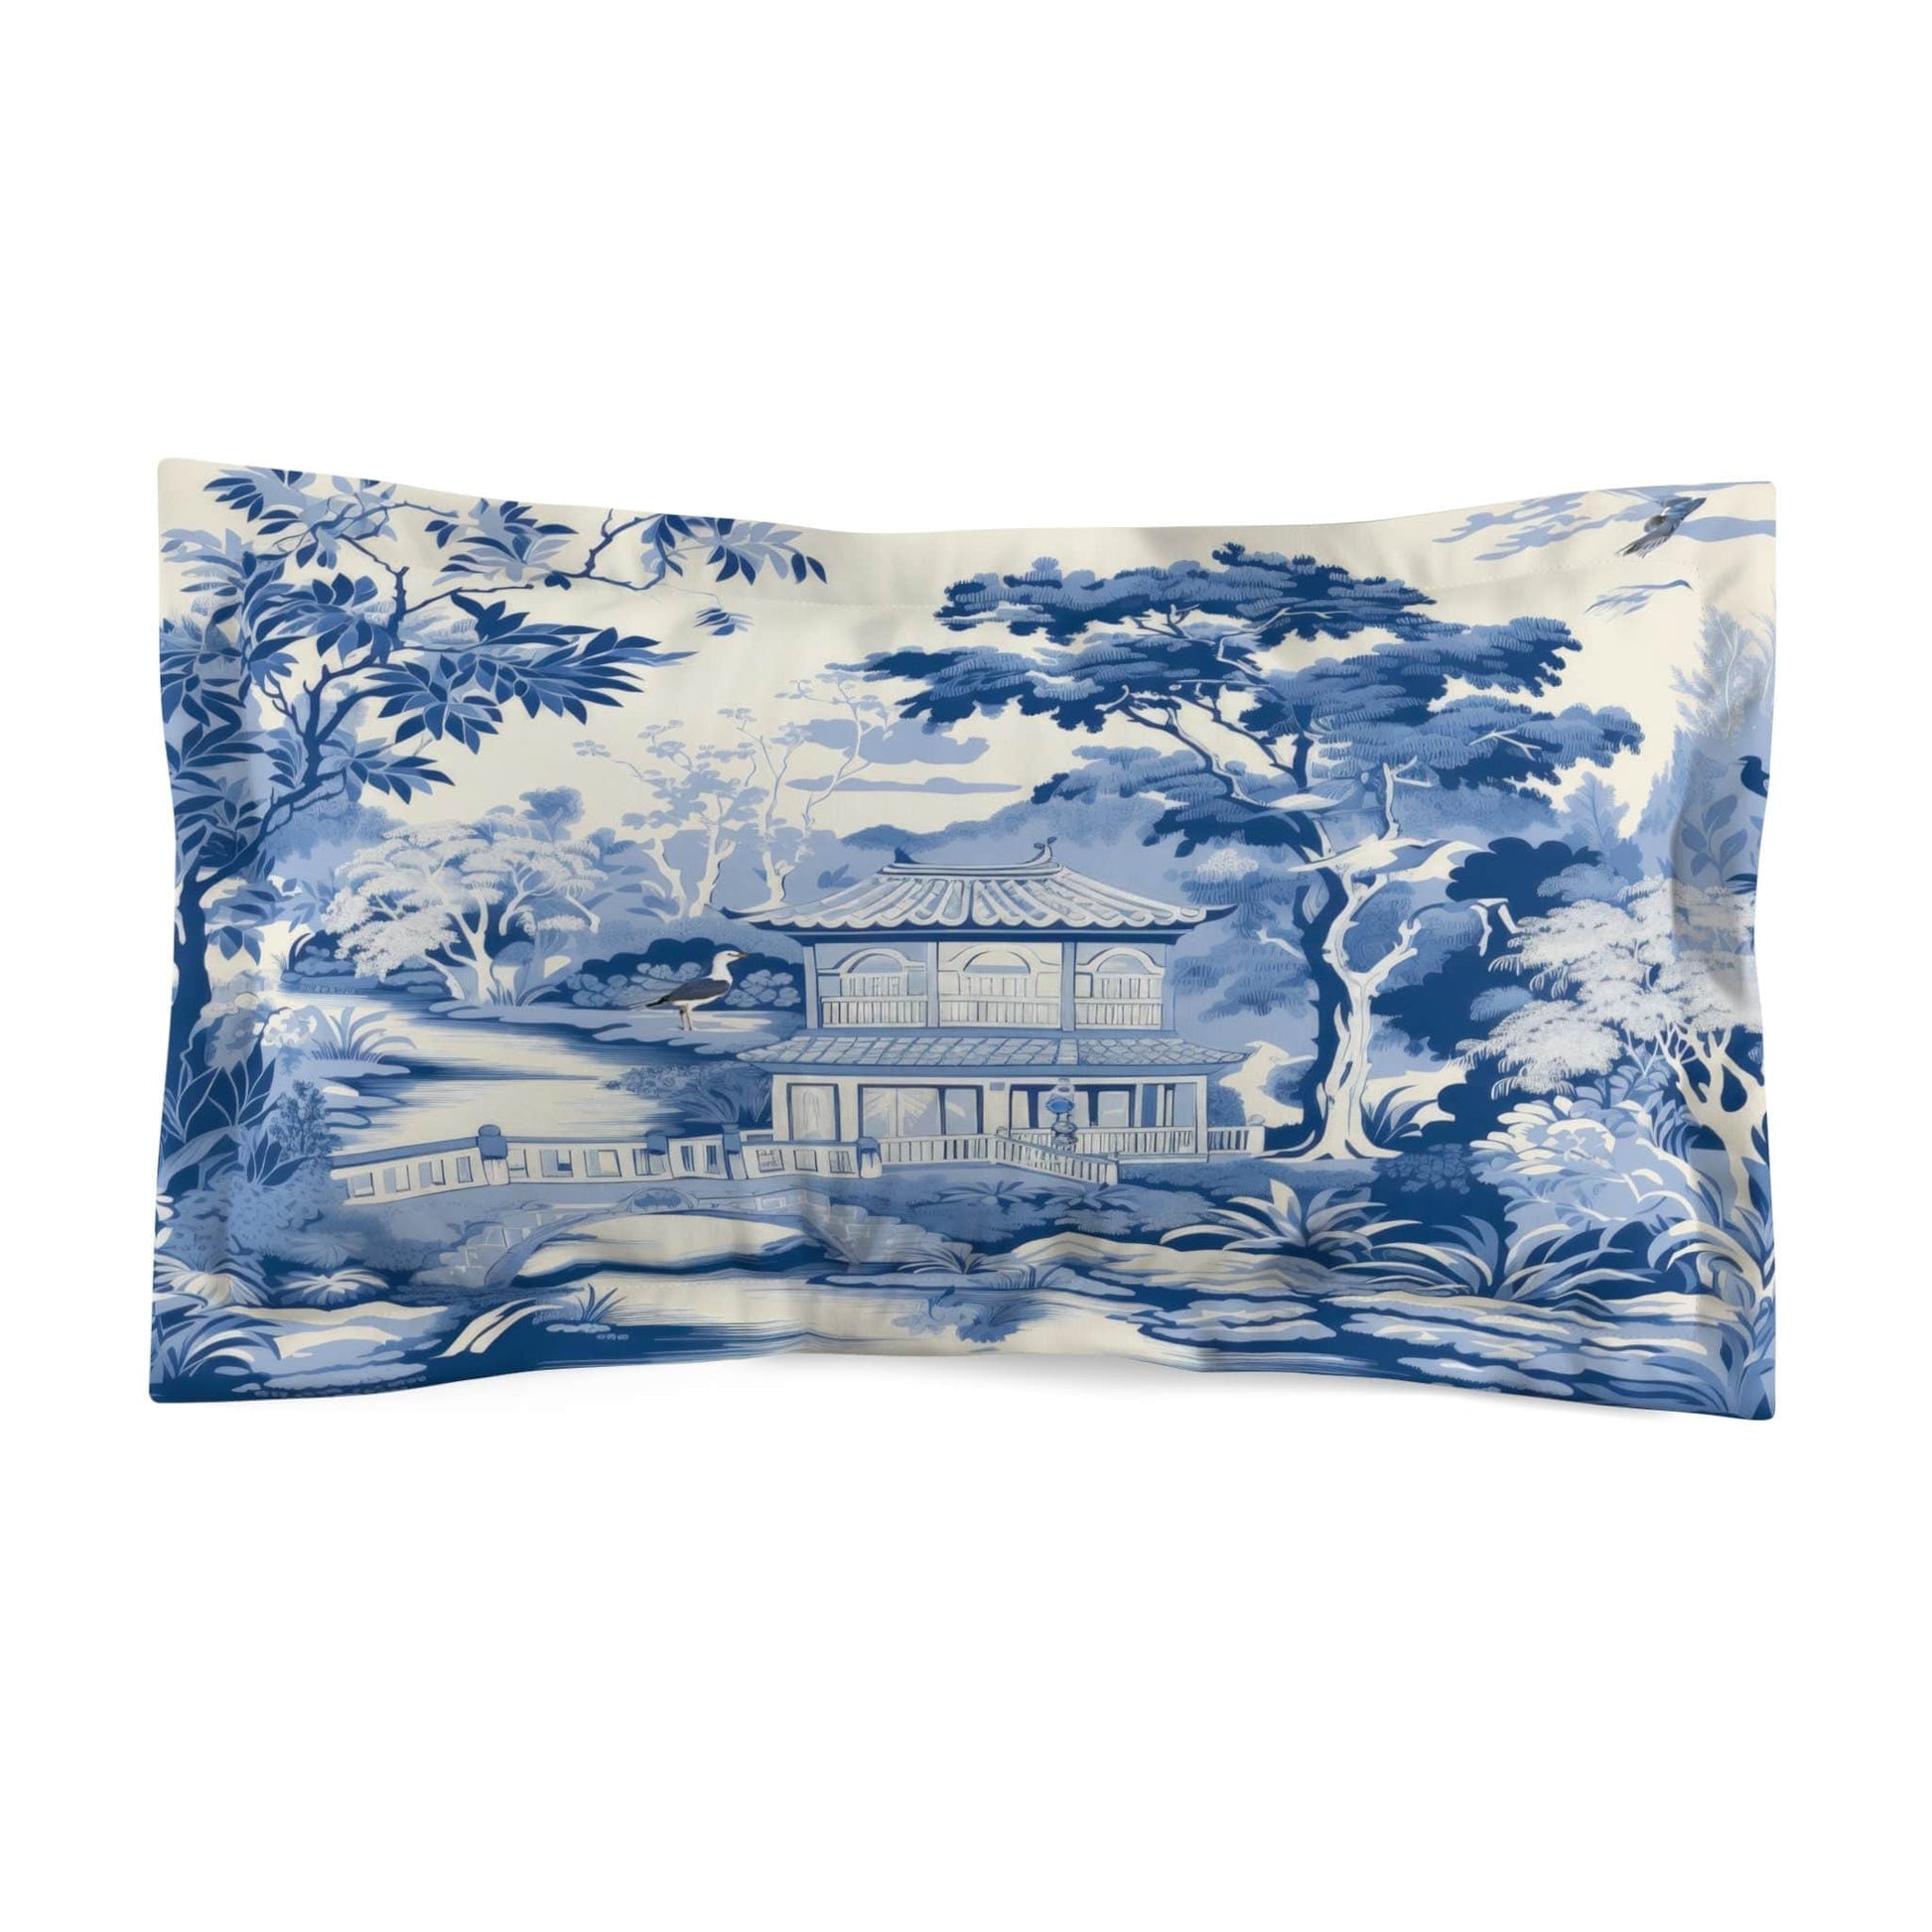 Kate McEnroe New York Chinoiserie Pagoda Floral Pillow Sham, Country Farmhouse Grandmillenial Bedroom Pillow Covers, Rustic Chic Bedroom Decor - 12068823